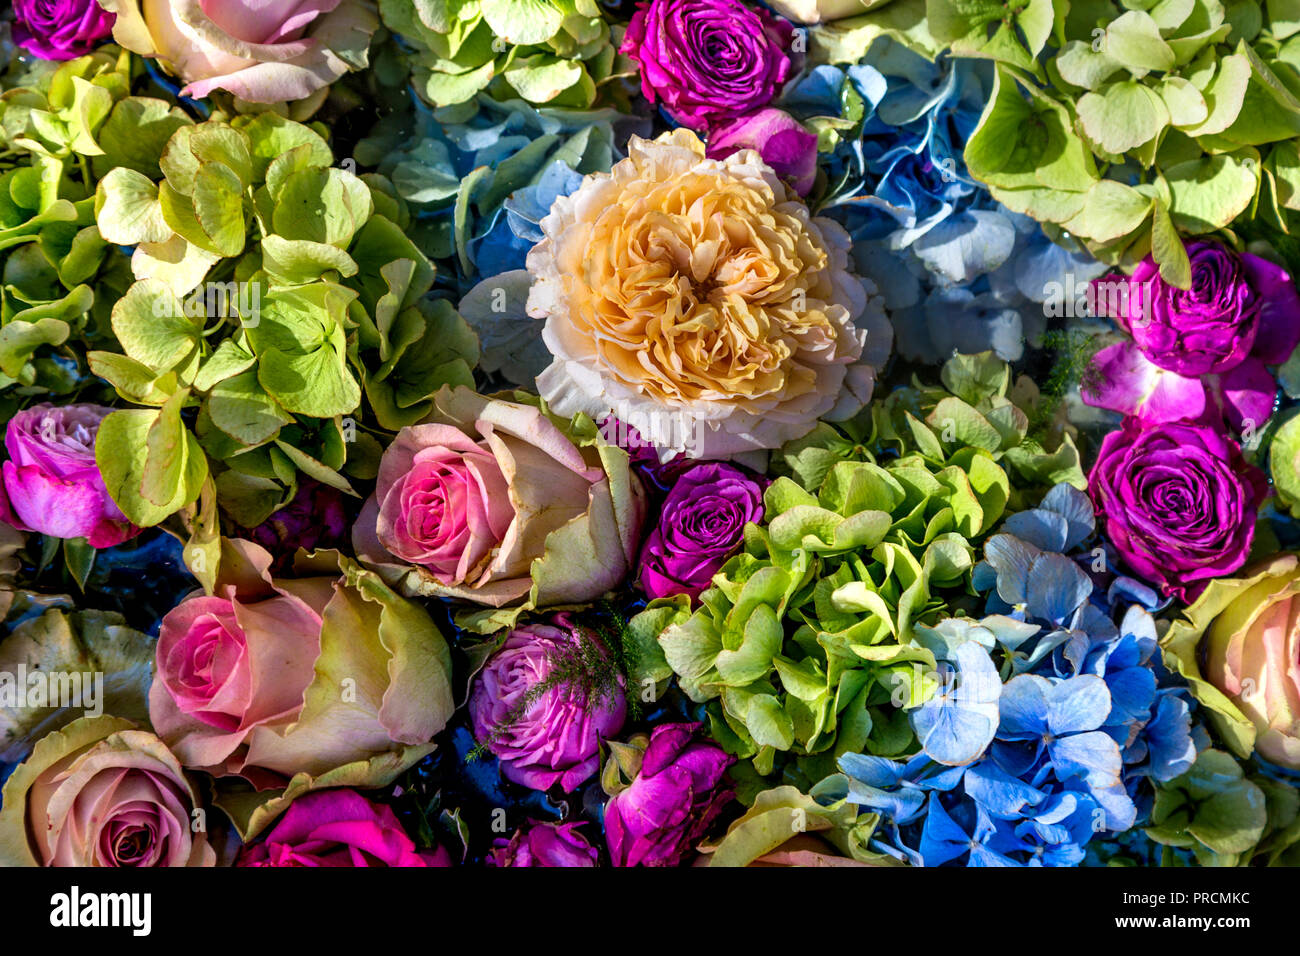 Background of pastel coloured flowers and roses in pink, lilac and blue Stock Photo